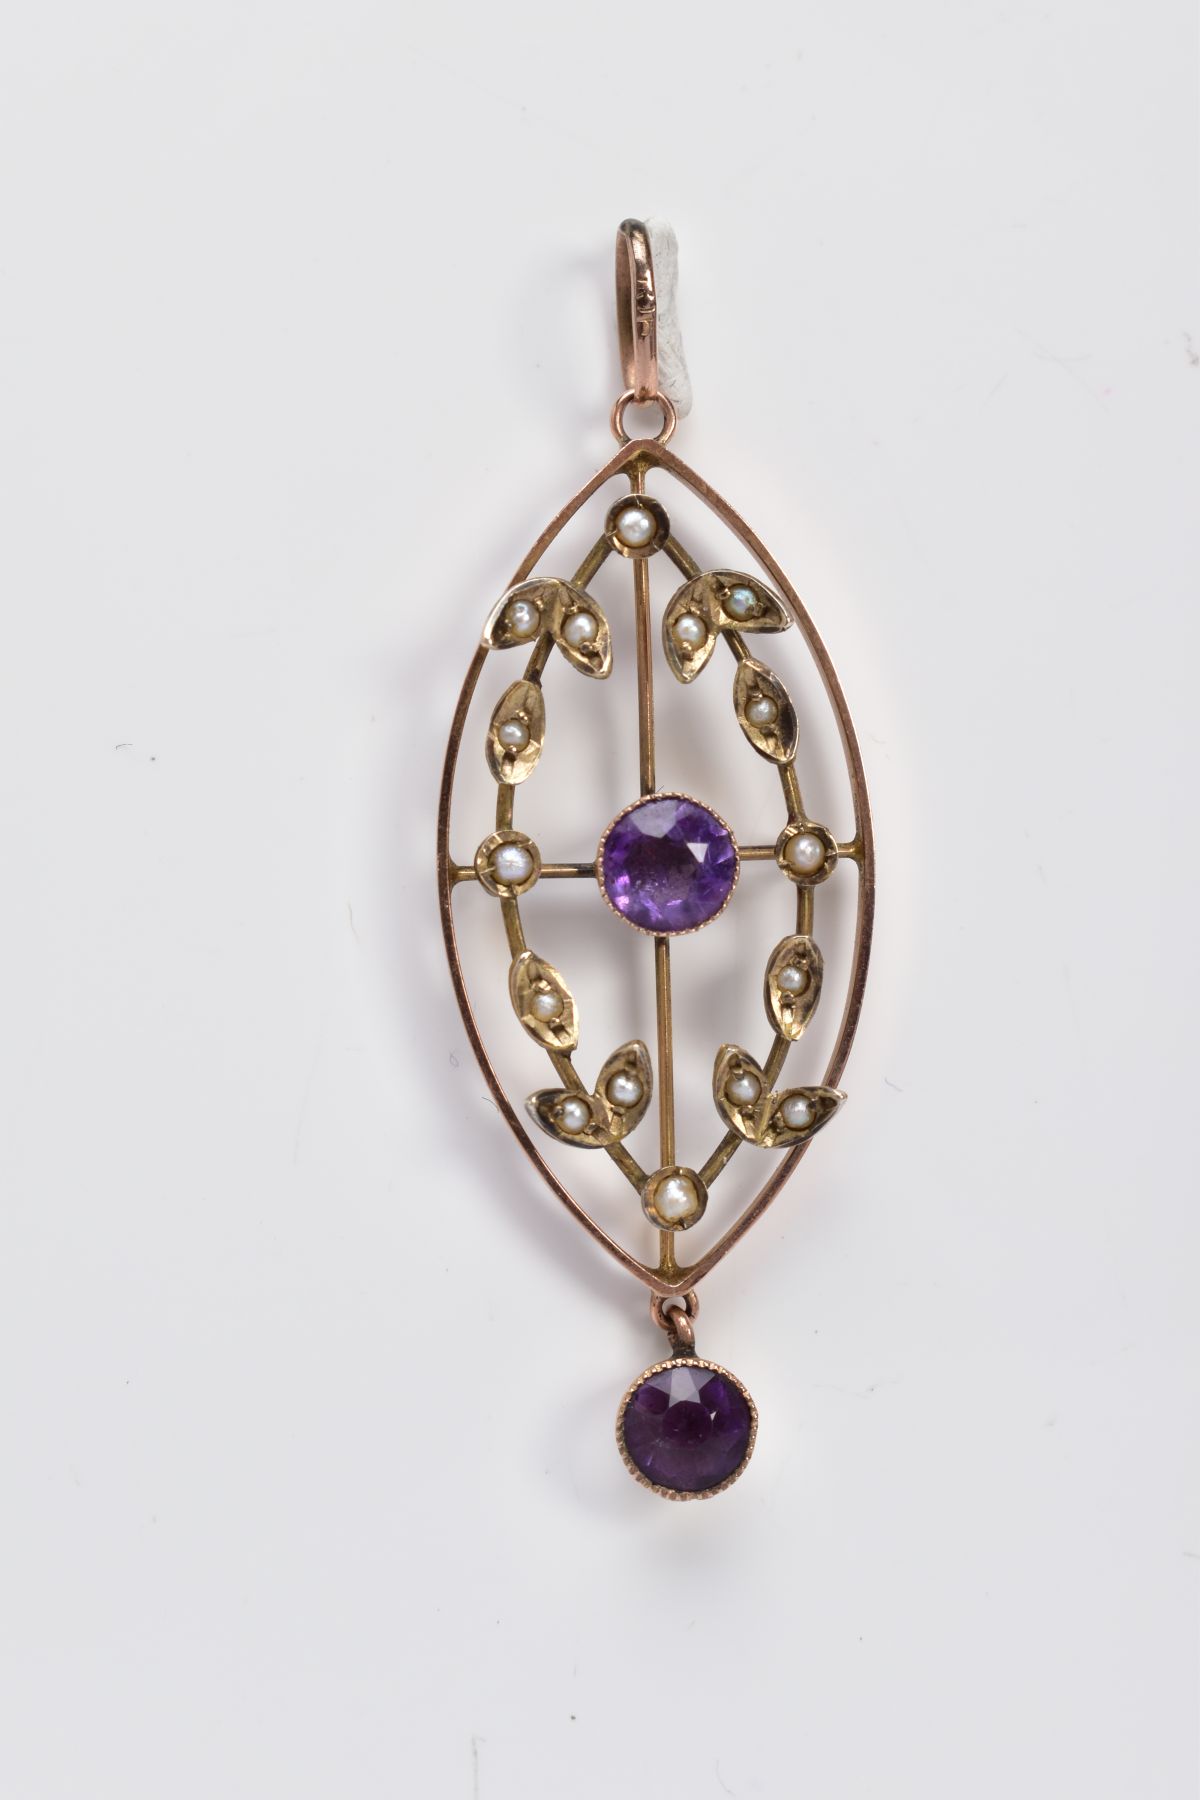 AN EDWARDIAN OPENWORK PENDANT, the rose gold coloured pendant of oval form, set with a central